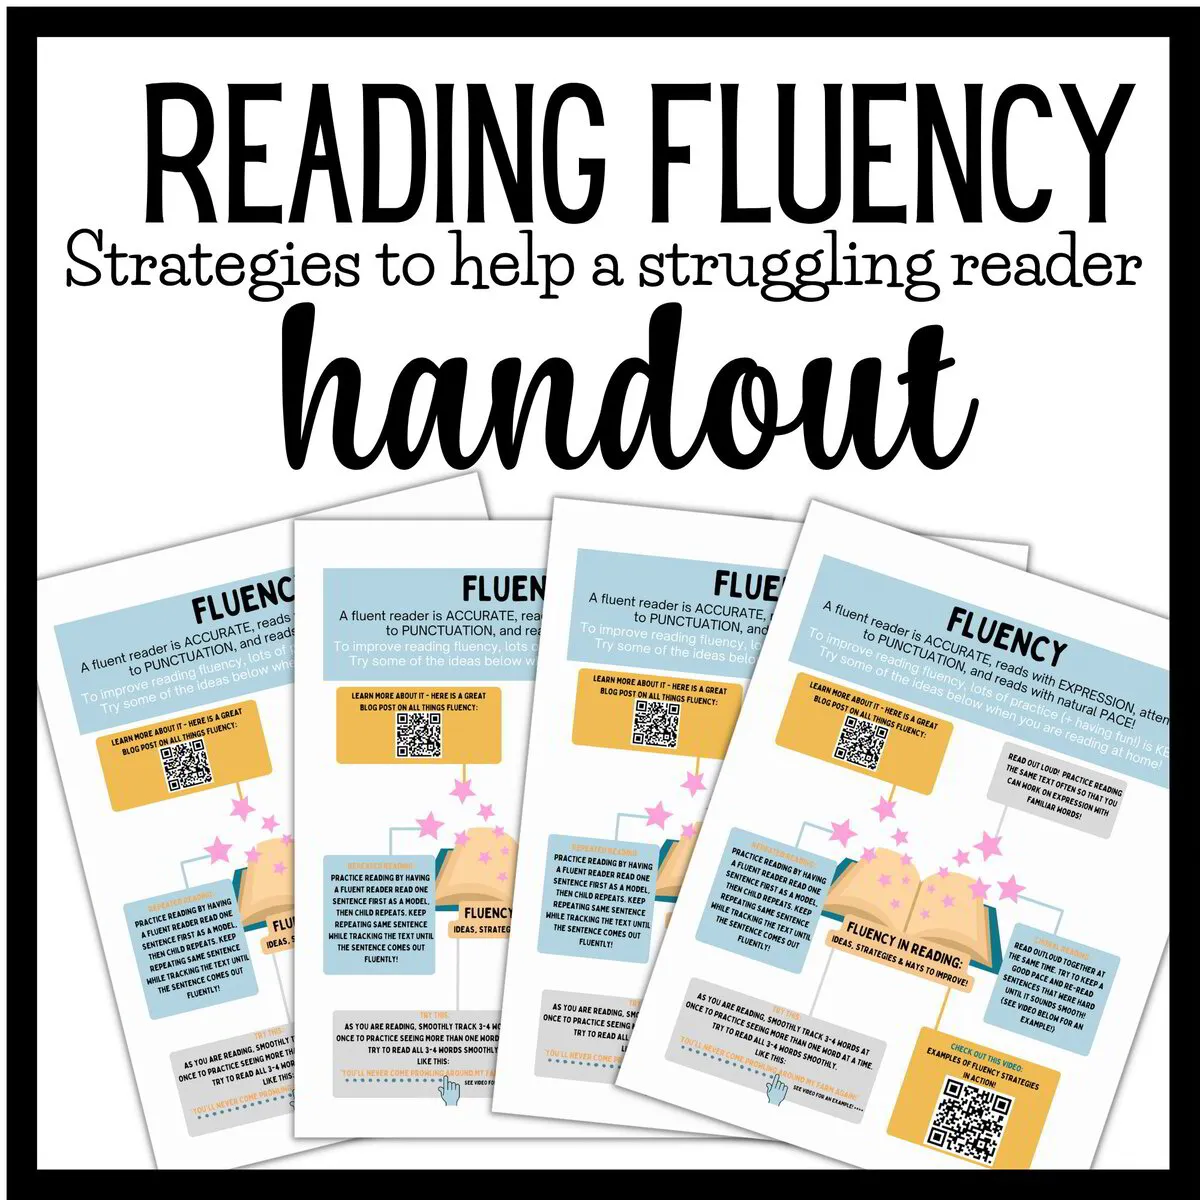 Reading Fluency - How to Help at Home